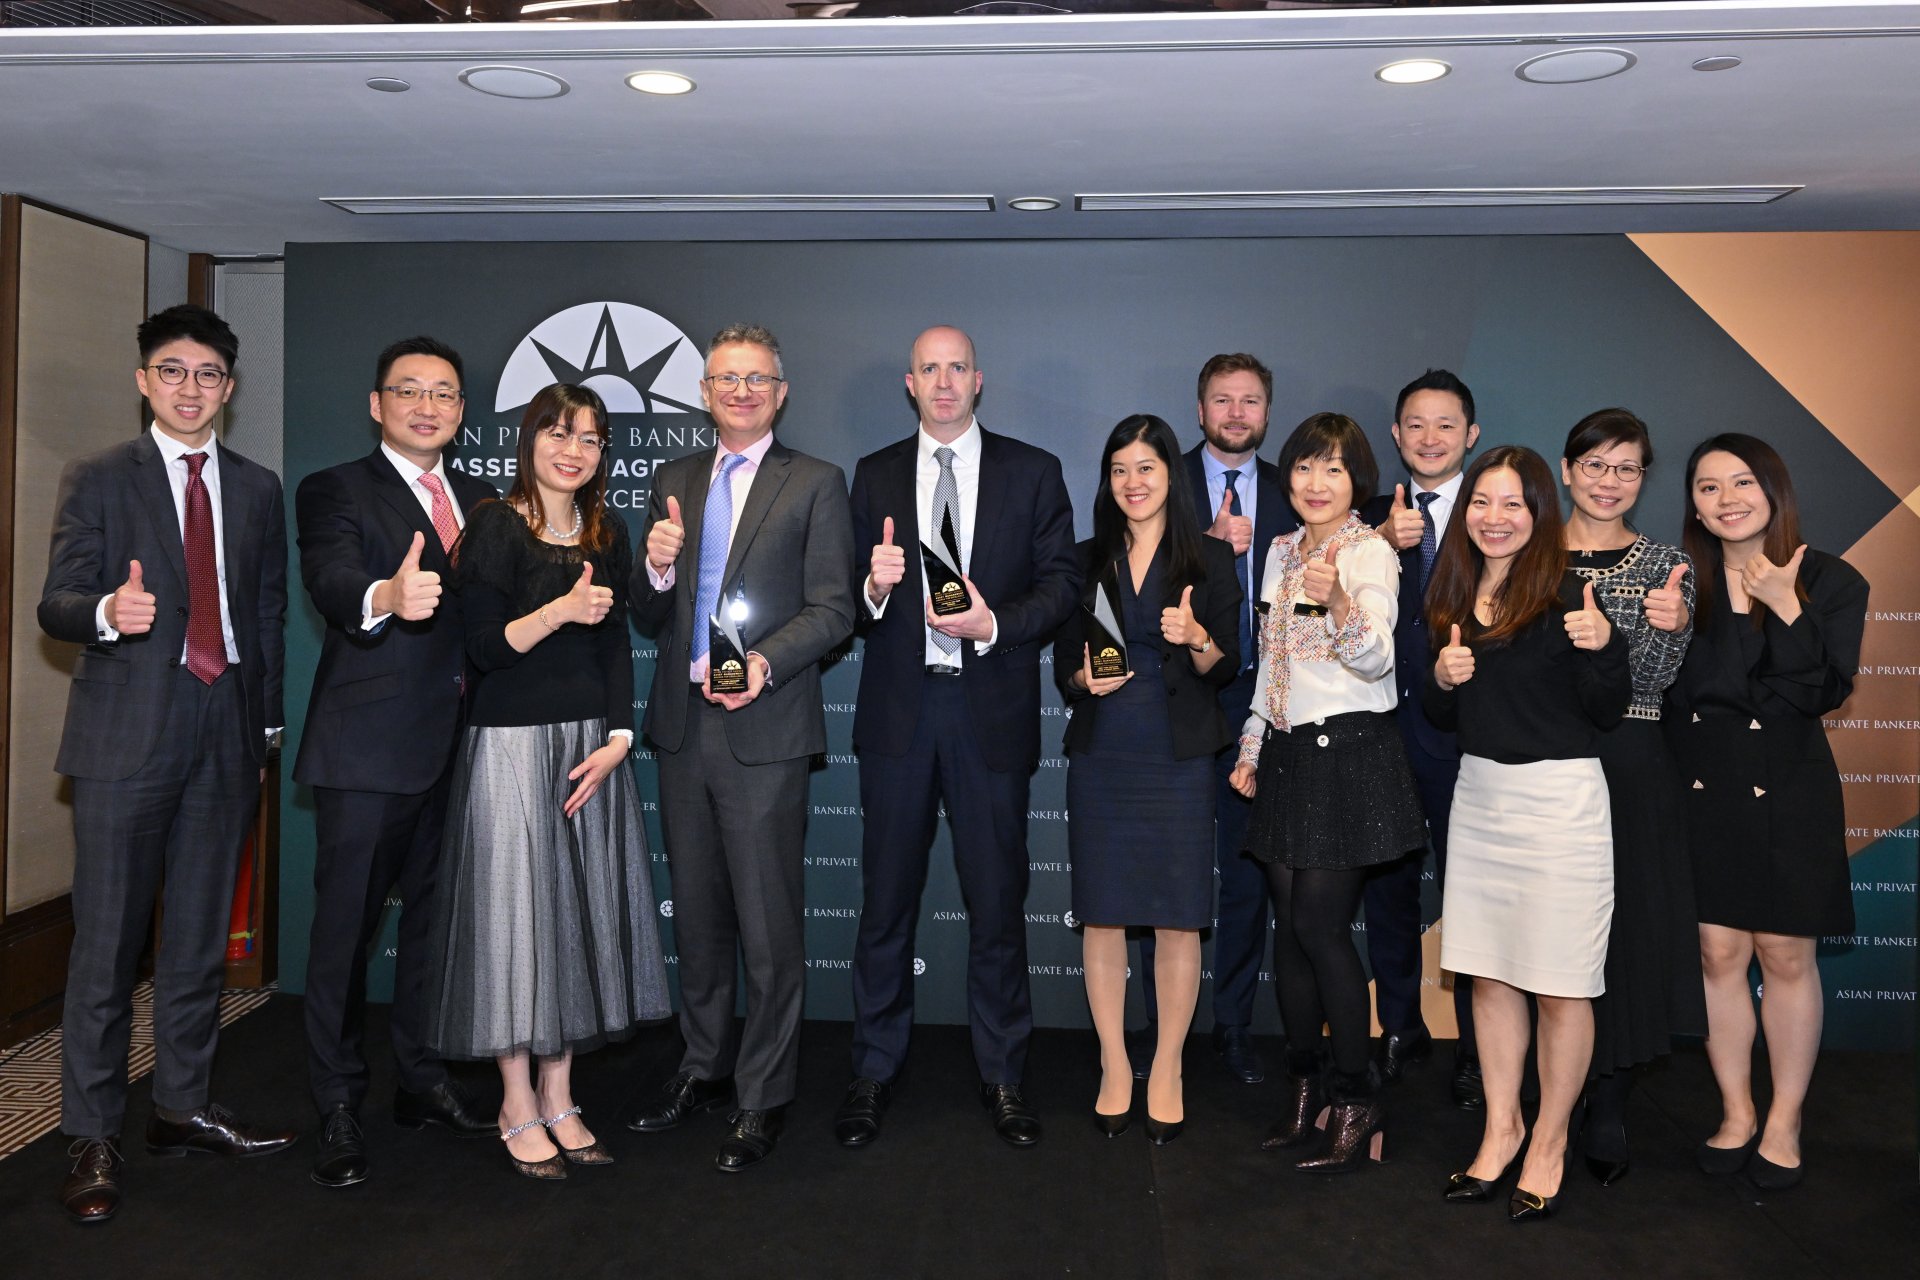 Congratulations to the team at J.P. Morgan Asset Management for their four wins at the 10th Asset Management Awards for Excellence